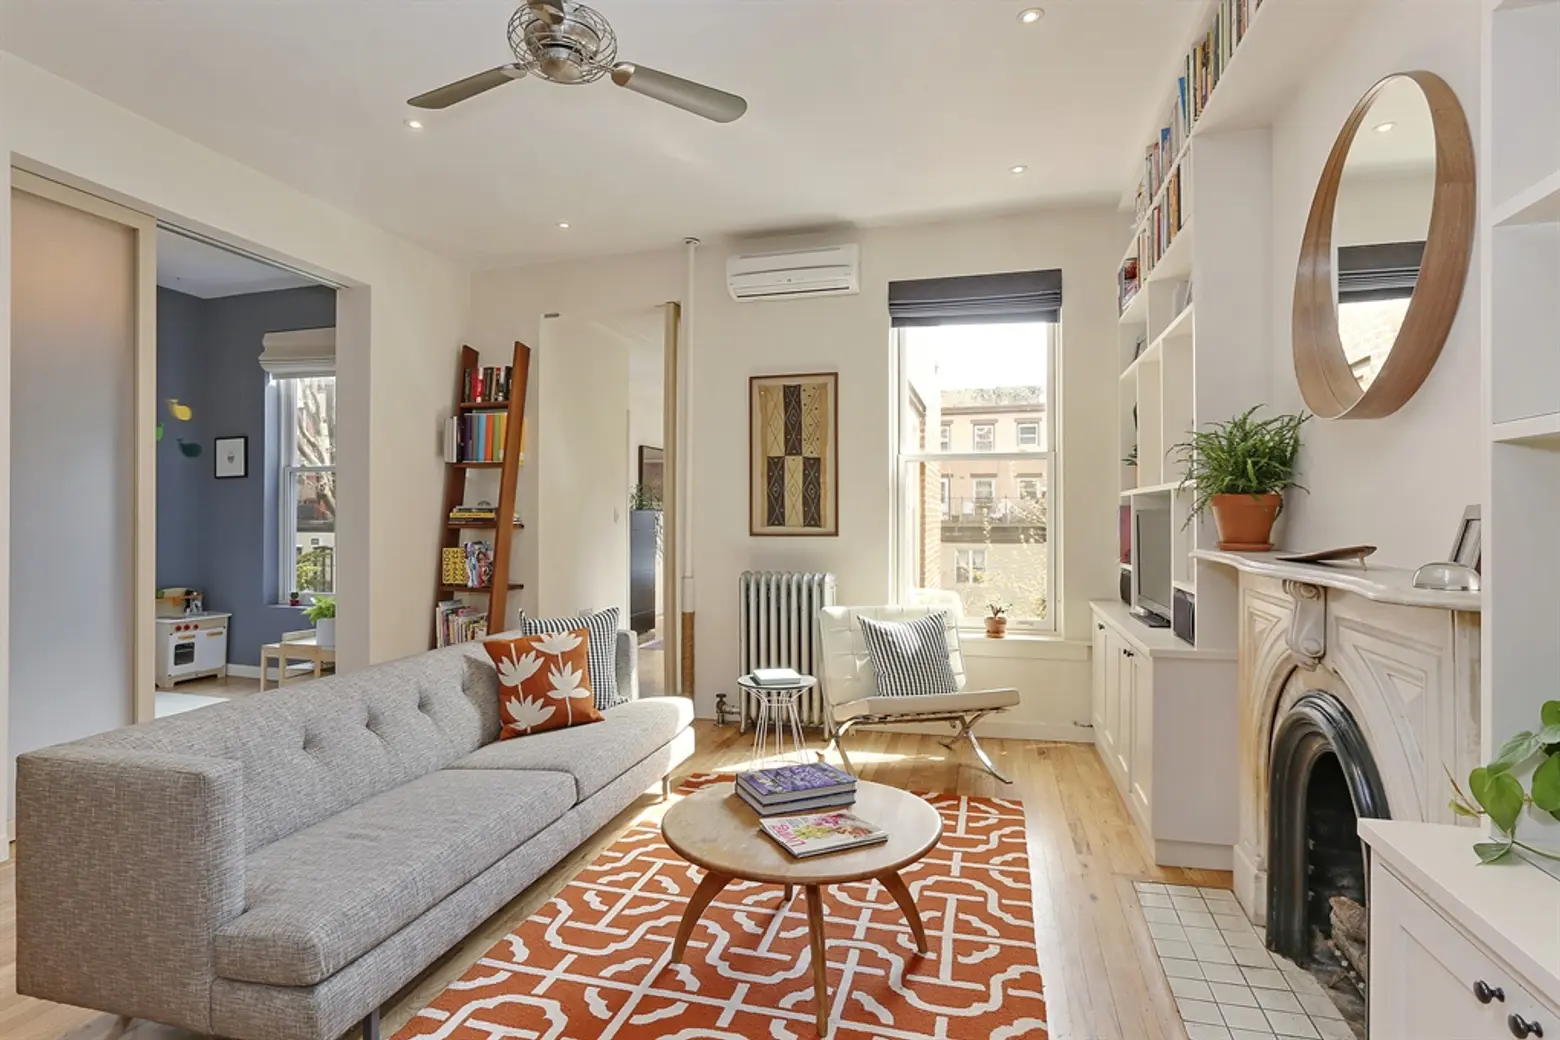 Fort Greene Co-op Puts You Squarely in the Middle of Brownstone Paradise